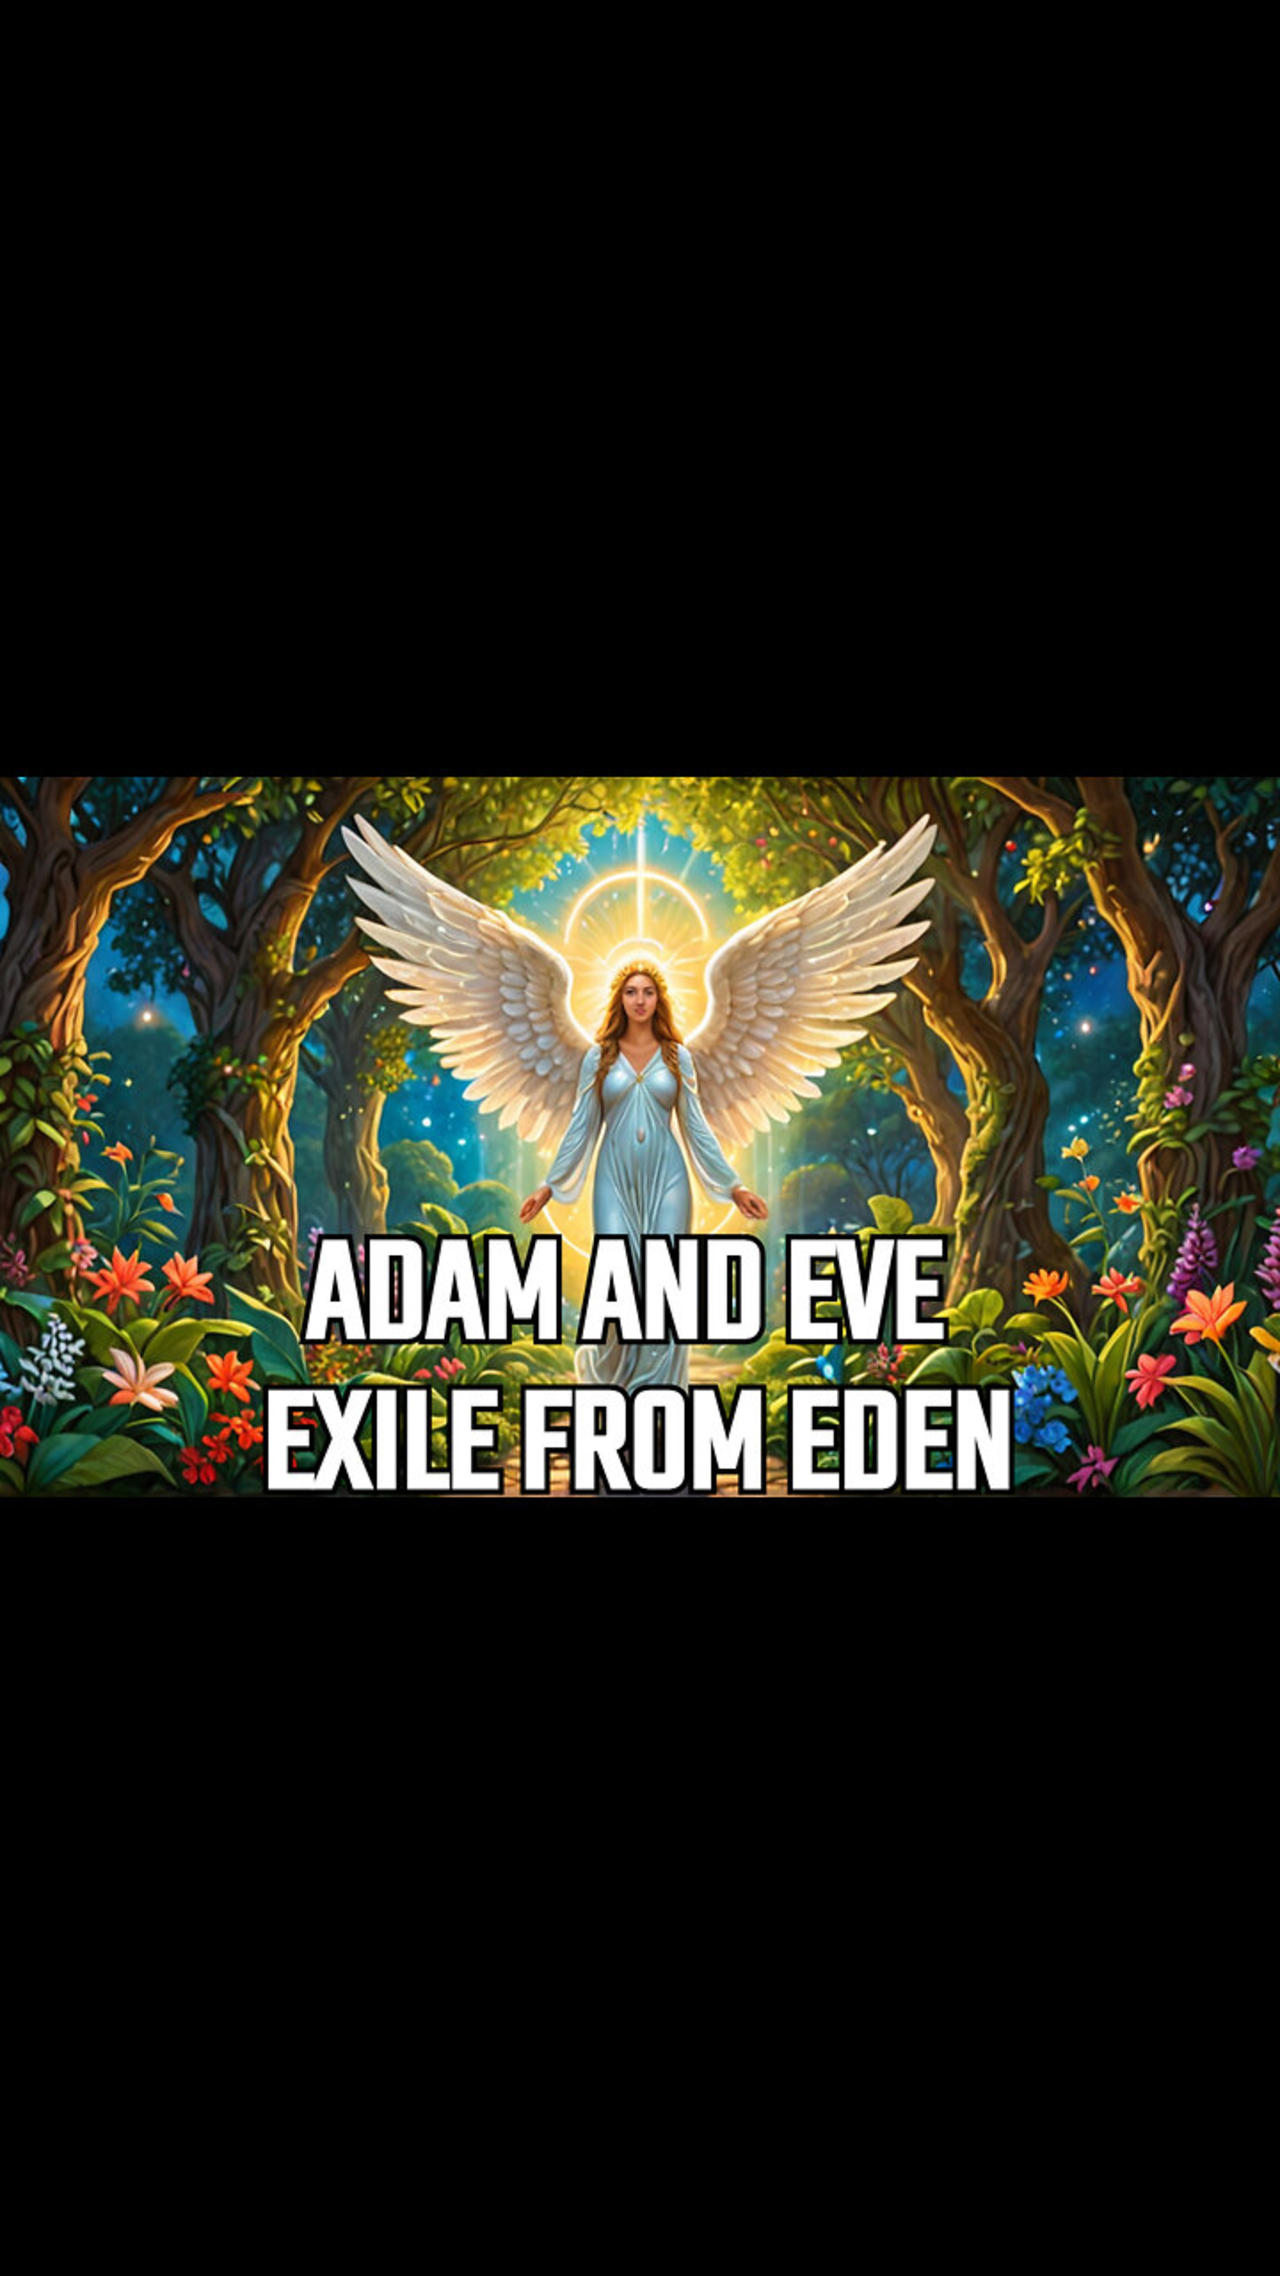 The Gnostic Exile from Eden: Liberation, Not Punishment